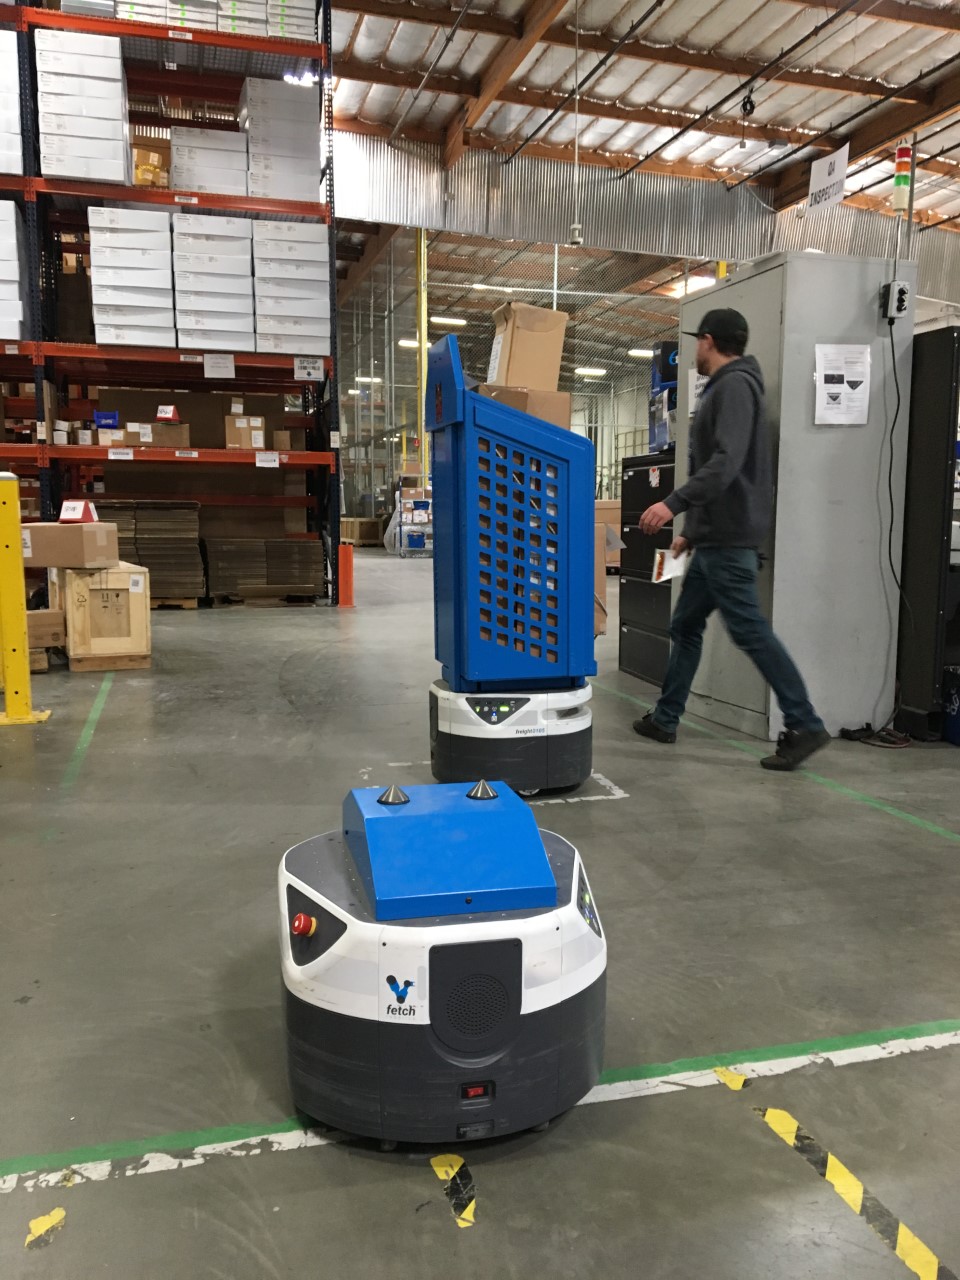 An RK Logistics associate walks by as two Fetch Robotics autonomous delivery robots arrive. The robots move completed orders from assembly to shipping, relieving employees of tedious tasks